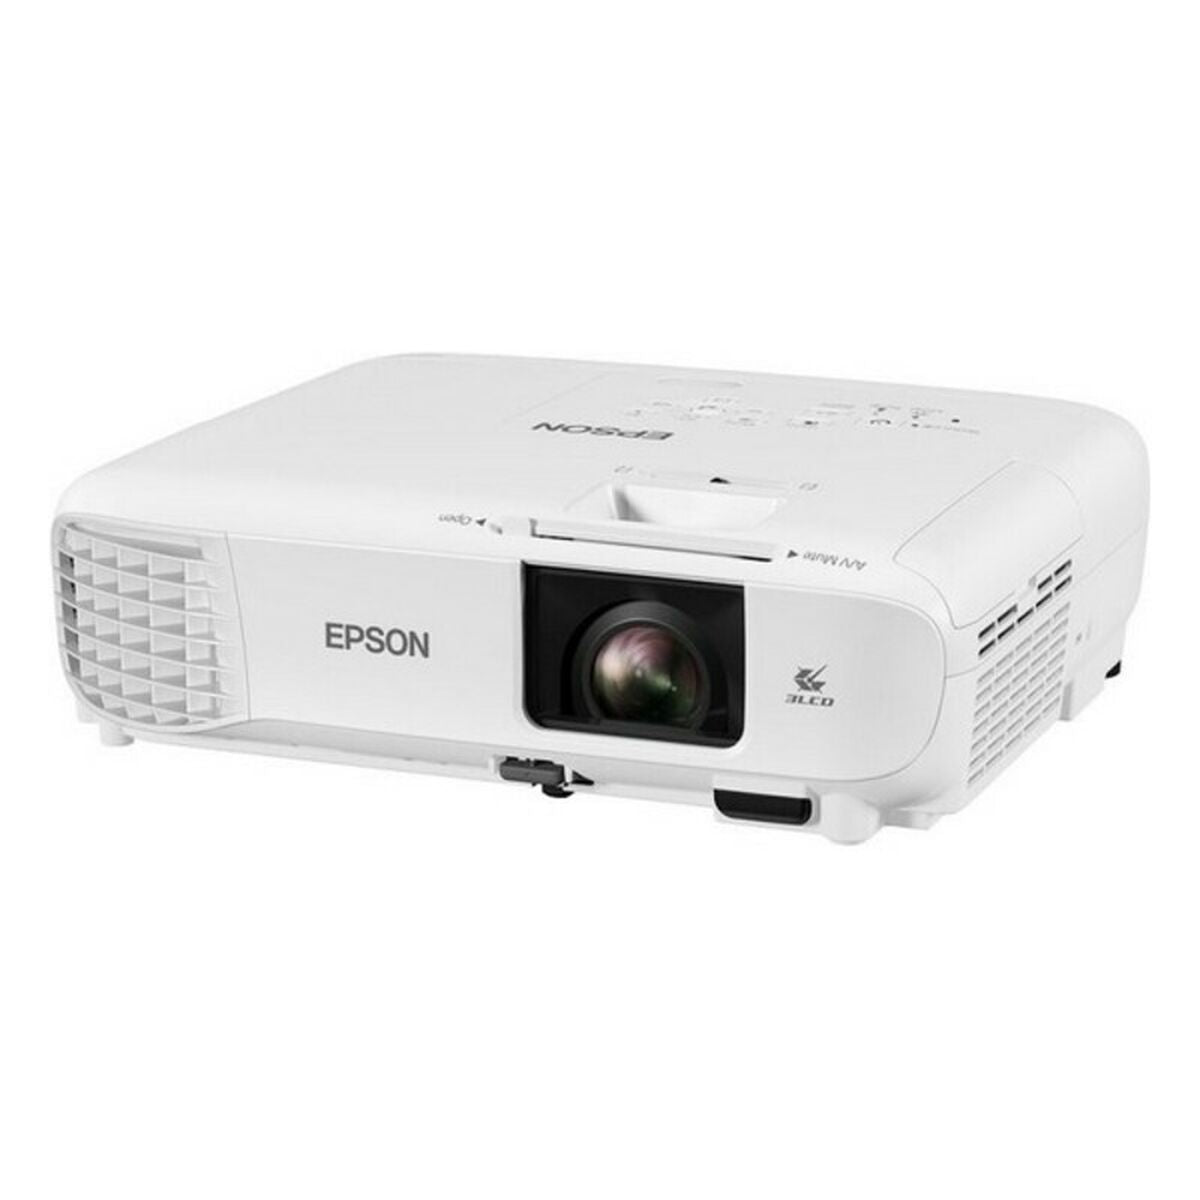 Projector Epson V11H983040 WXGA 3800 lm White 1080 px, Epson, Electronics, TV, Video and home cinema, projector-epson-v11h983040-wxga-3800-lm-white-1080-px, Brand_Epson, category-reference-2609, category-reference-2642, category-reference-2947, category-reference-t-18805, category-reference-t-19653, cinema and television, computers / peripherals, Condition_NEW, entertainment, office, Price_600 - 700, RiotNook